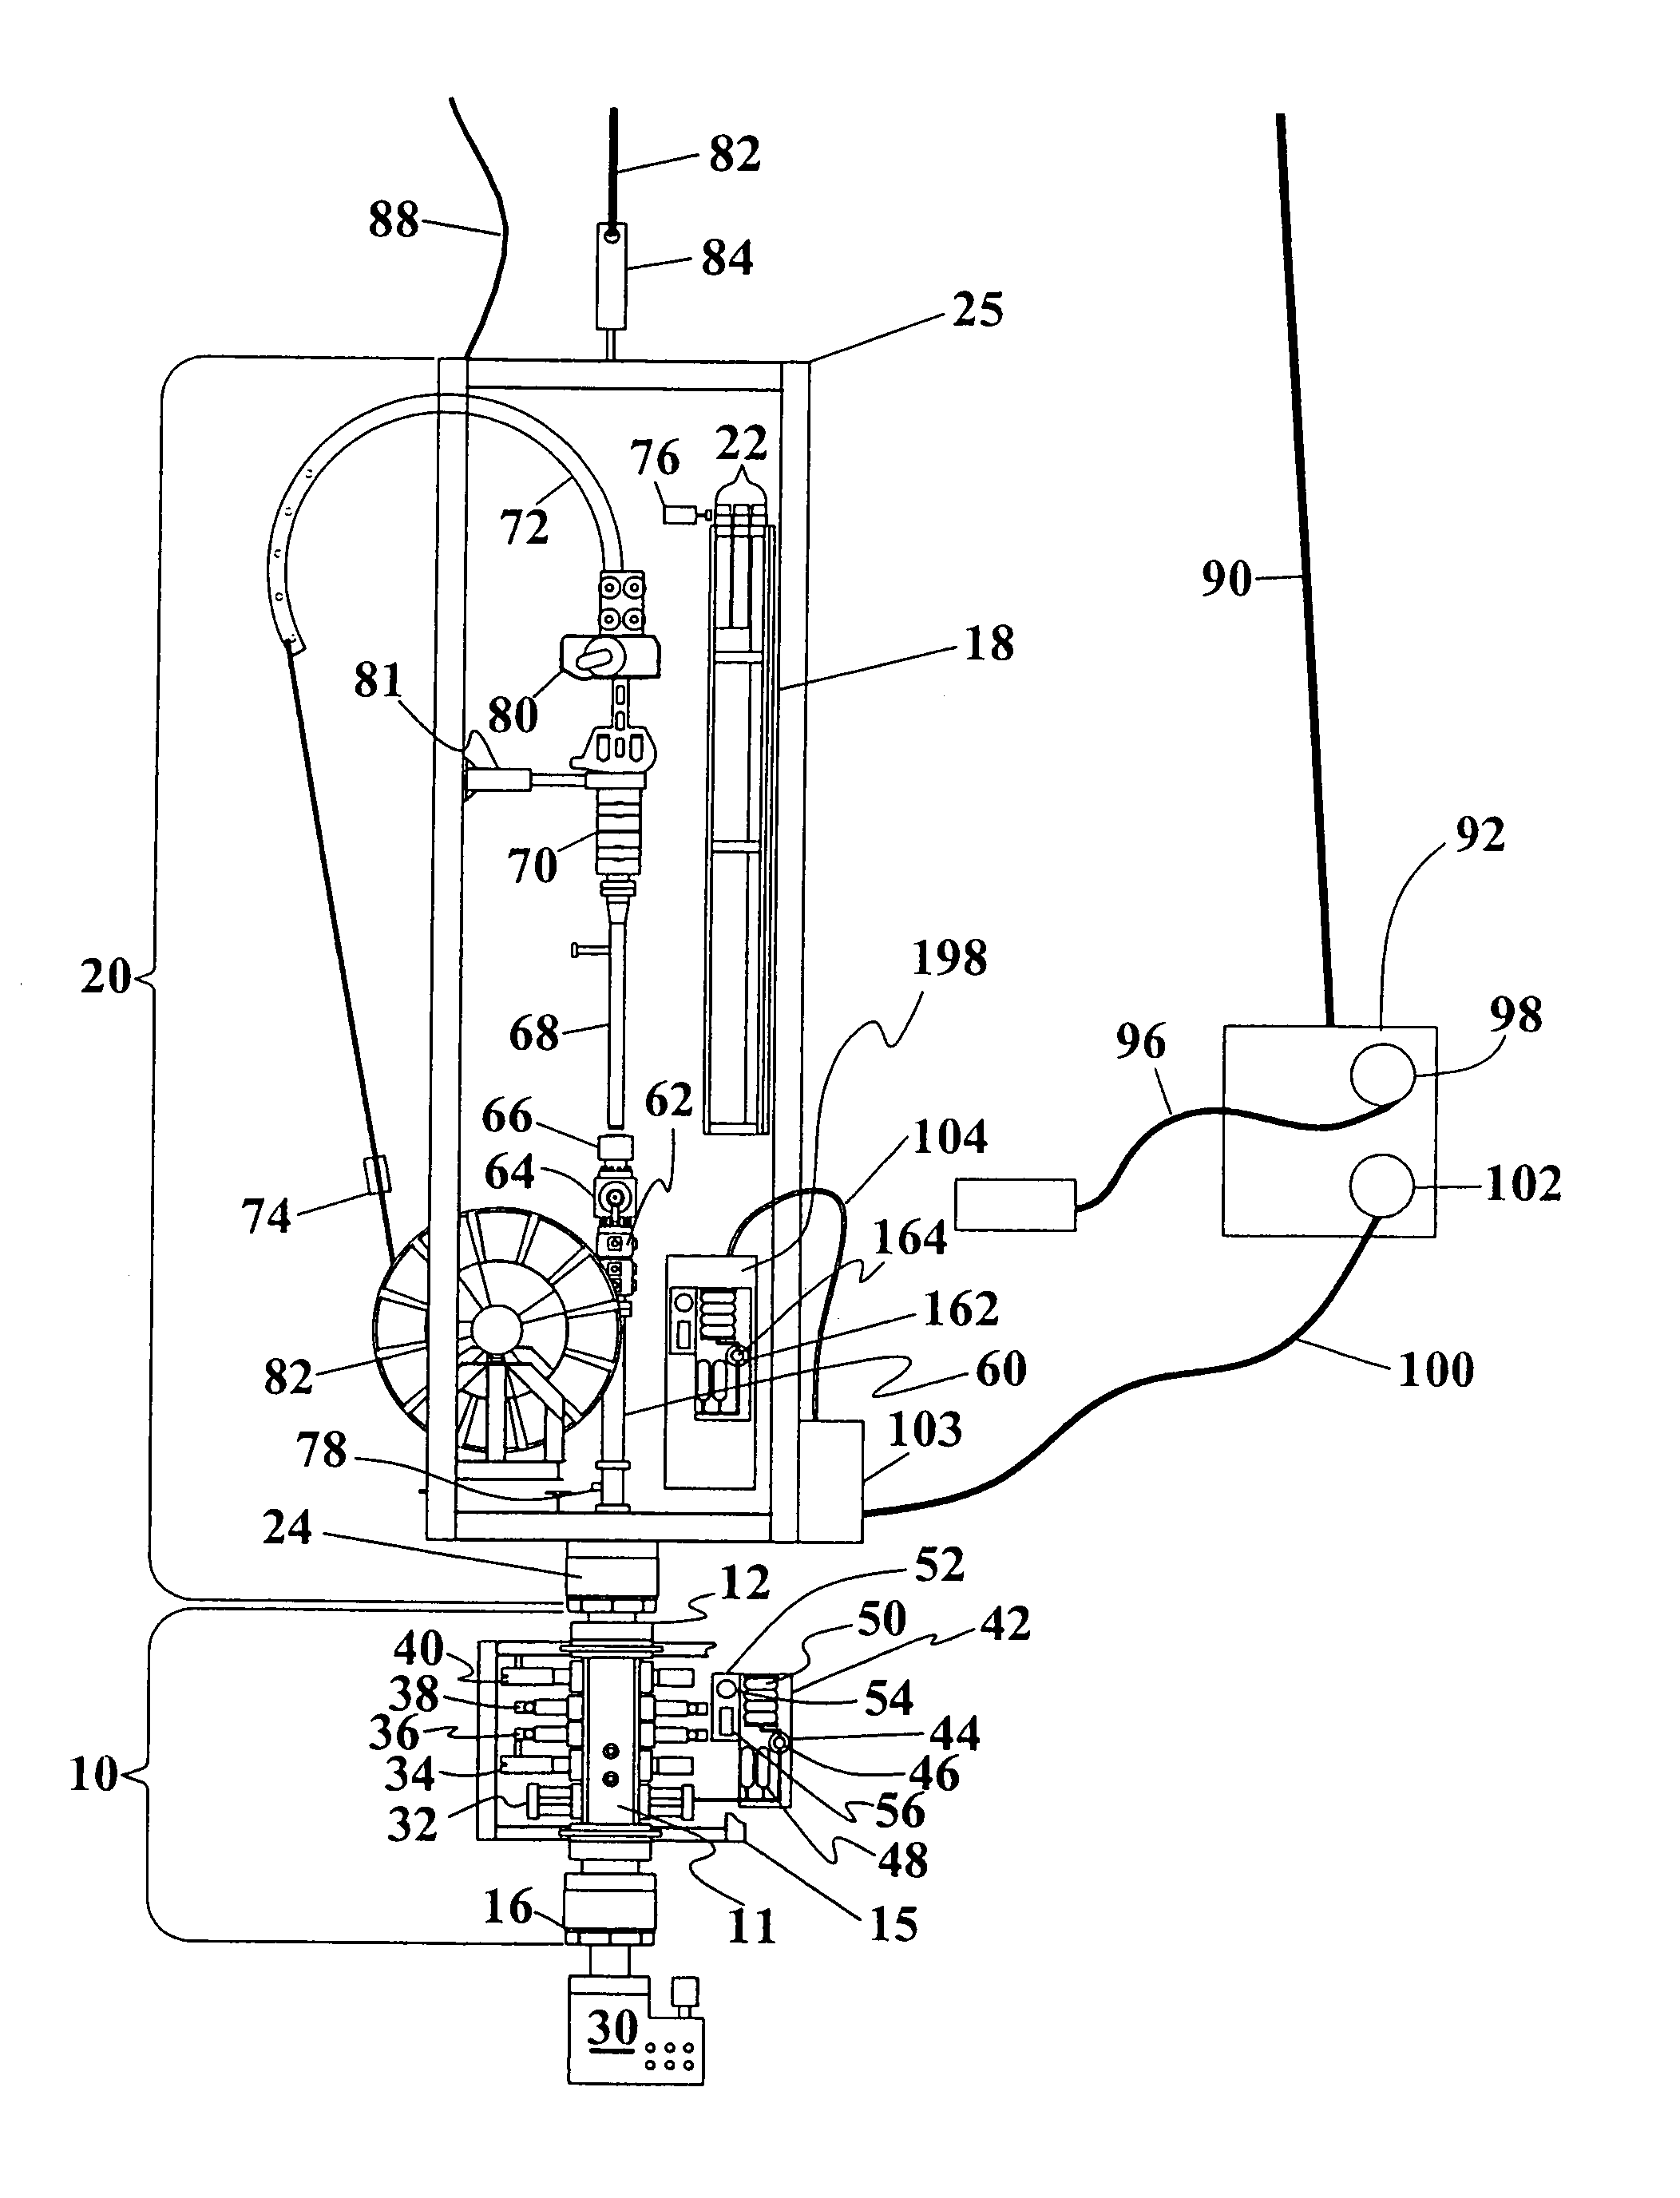 Subsea intervention system, method and components thereof